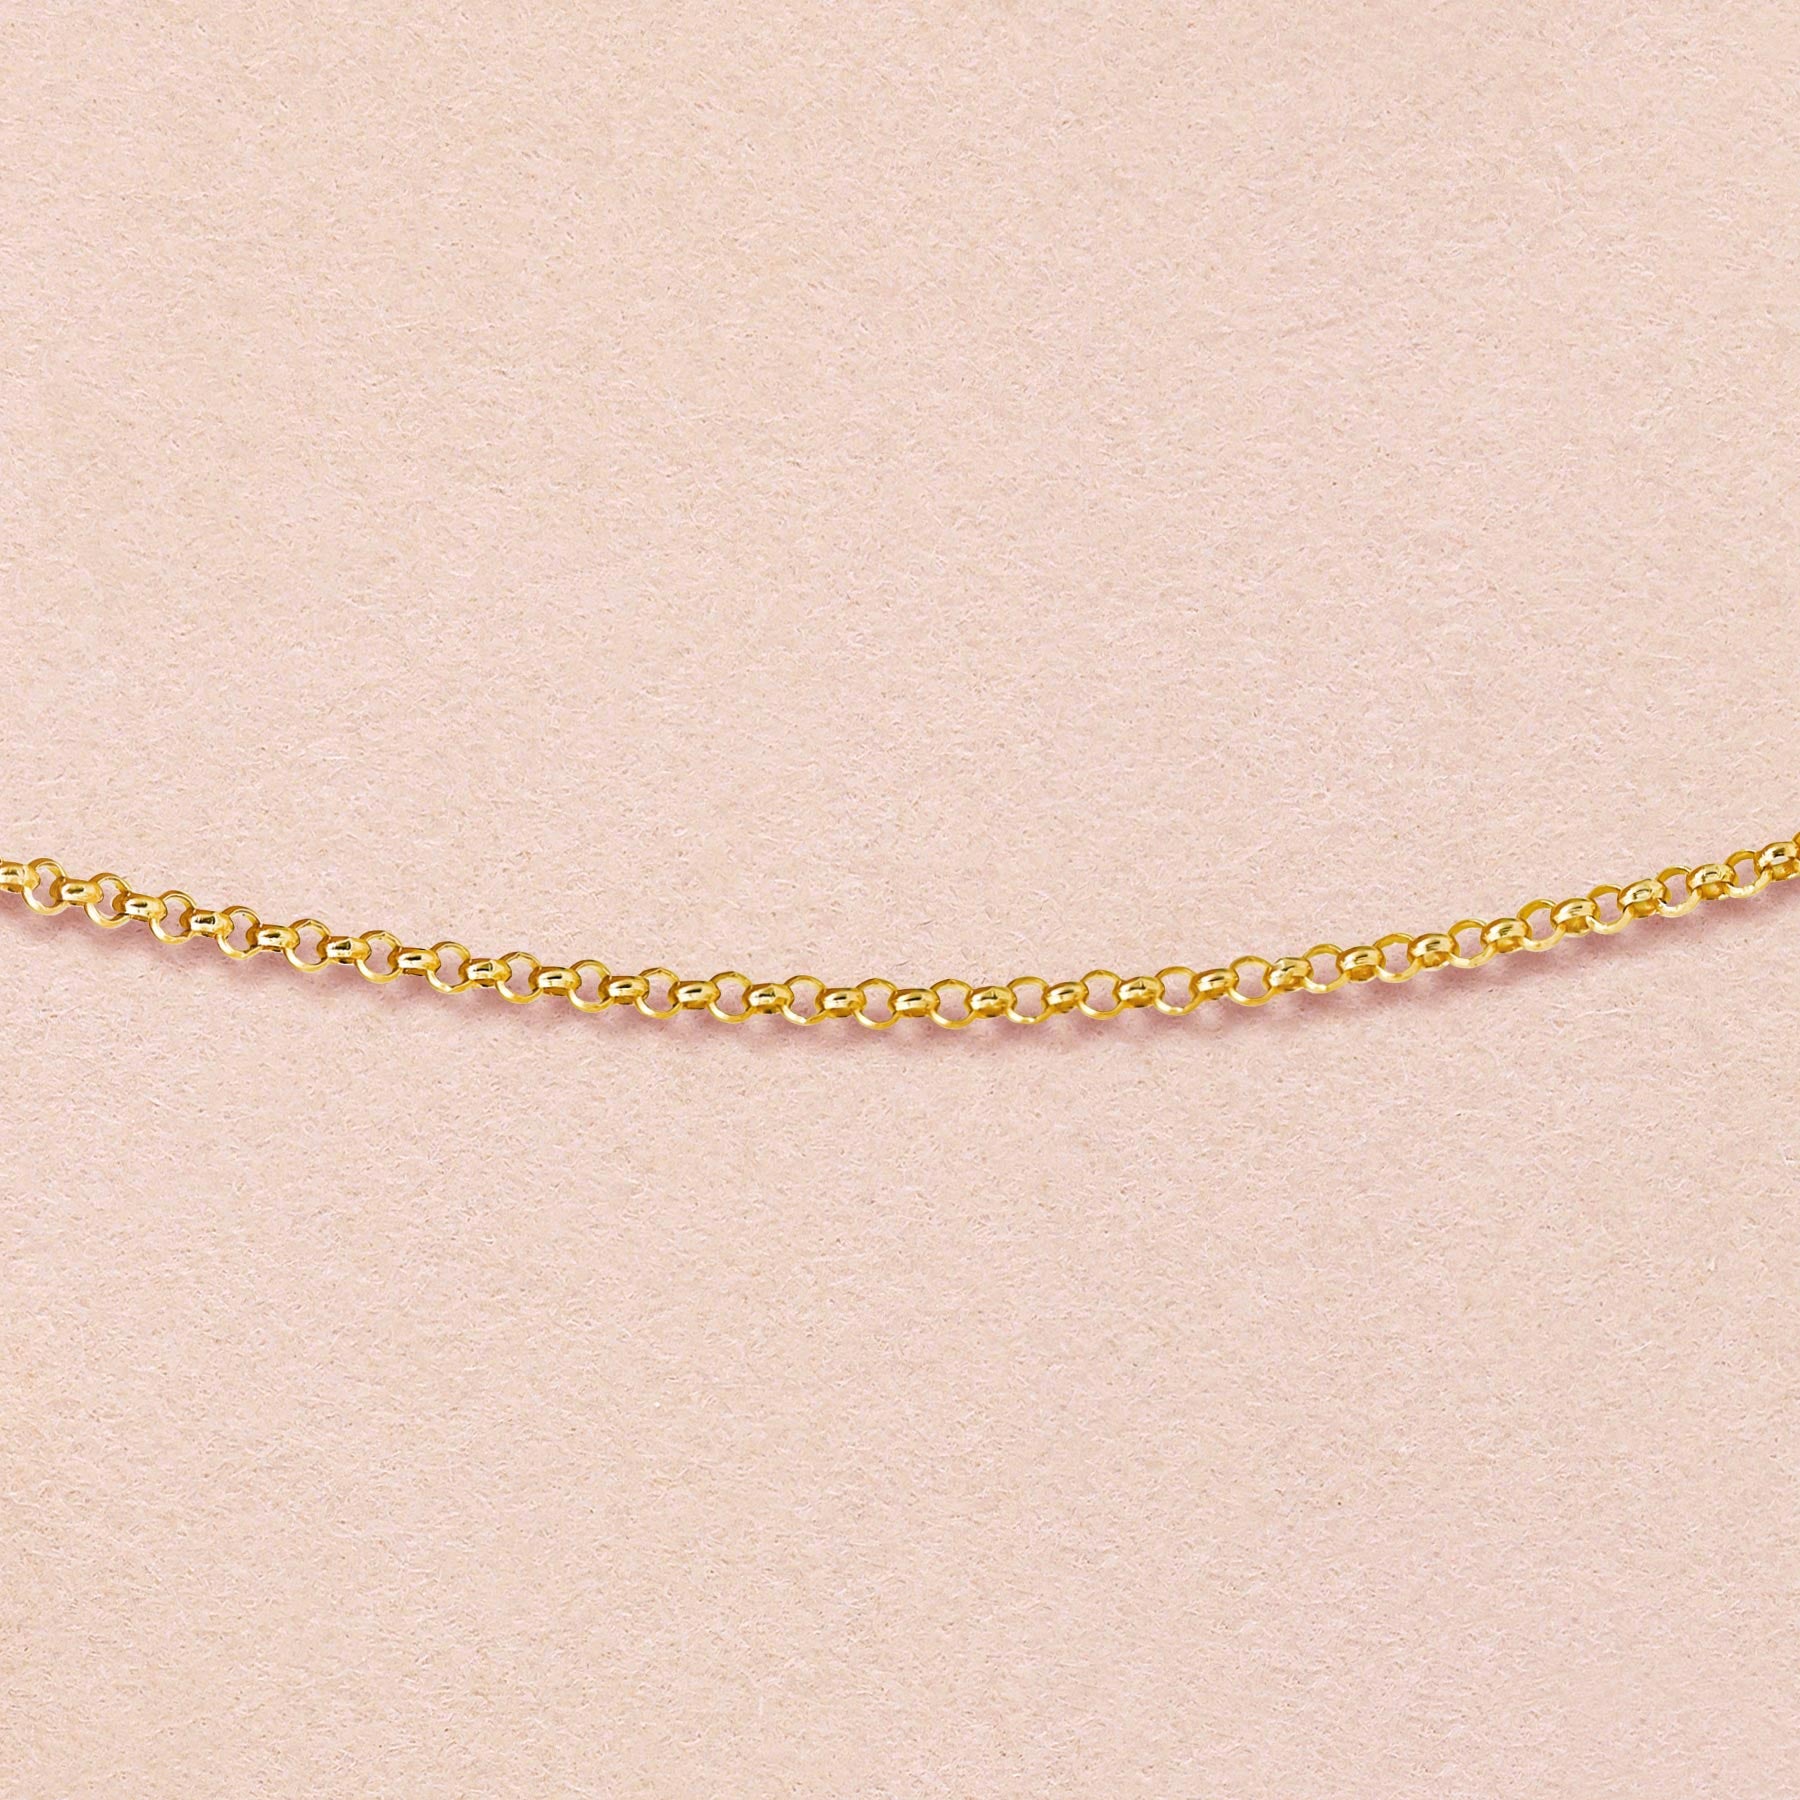 [GARDEN] 925 Sterling Silver Half Round Chain 45cm (Yellow Gold) - Product Image